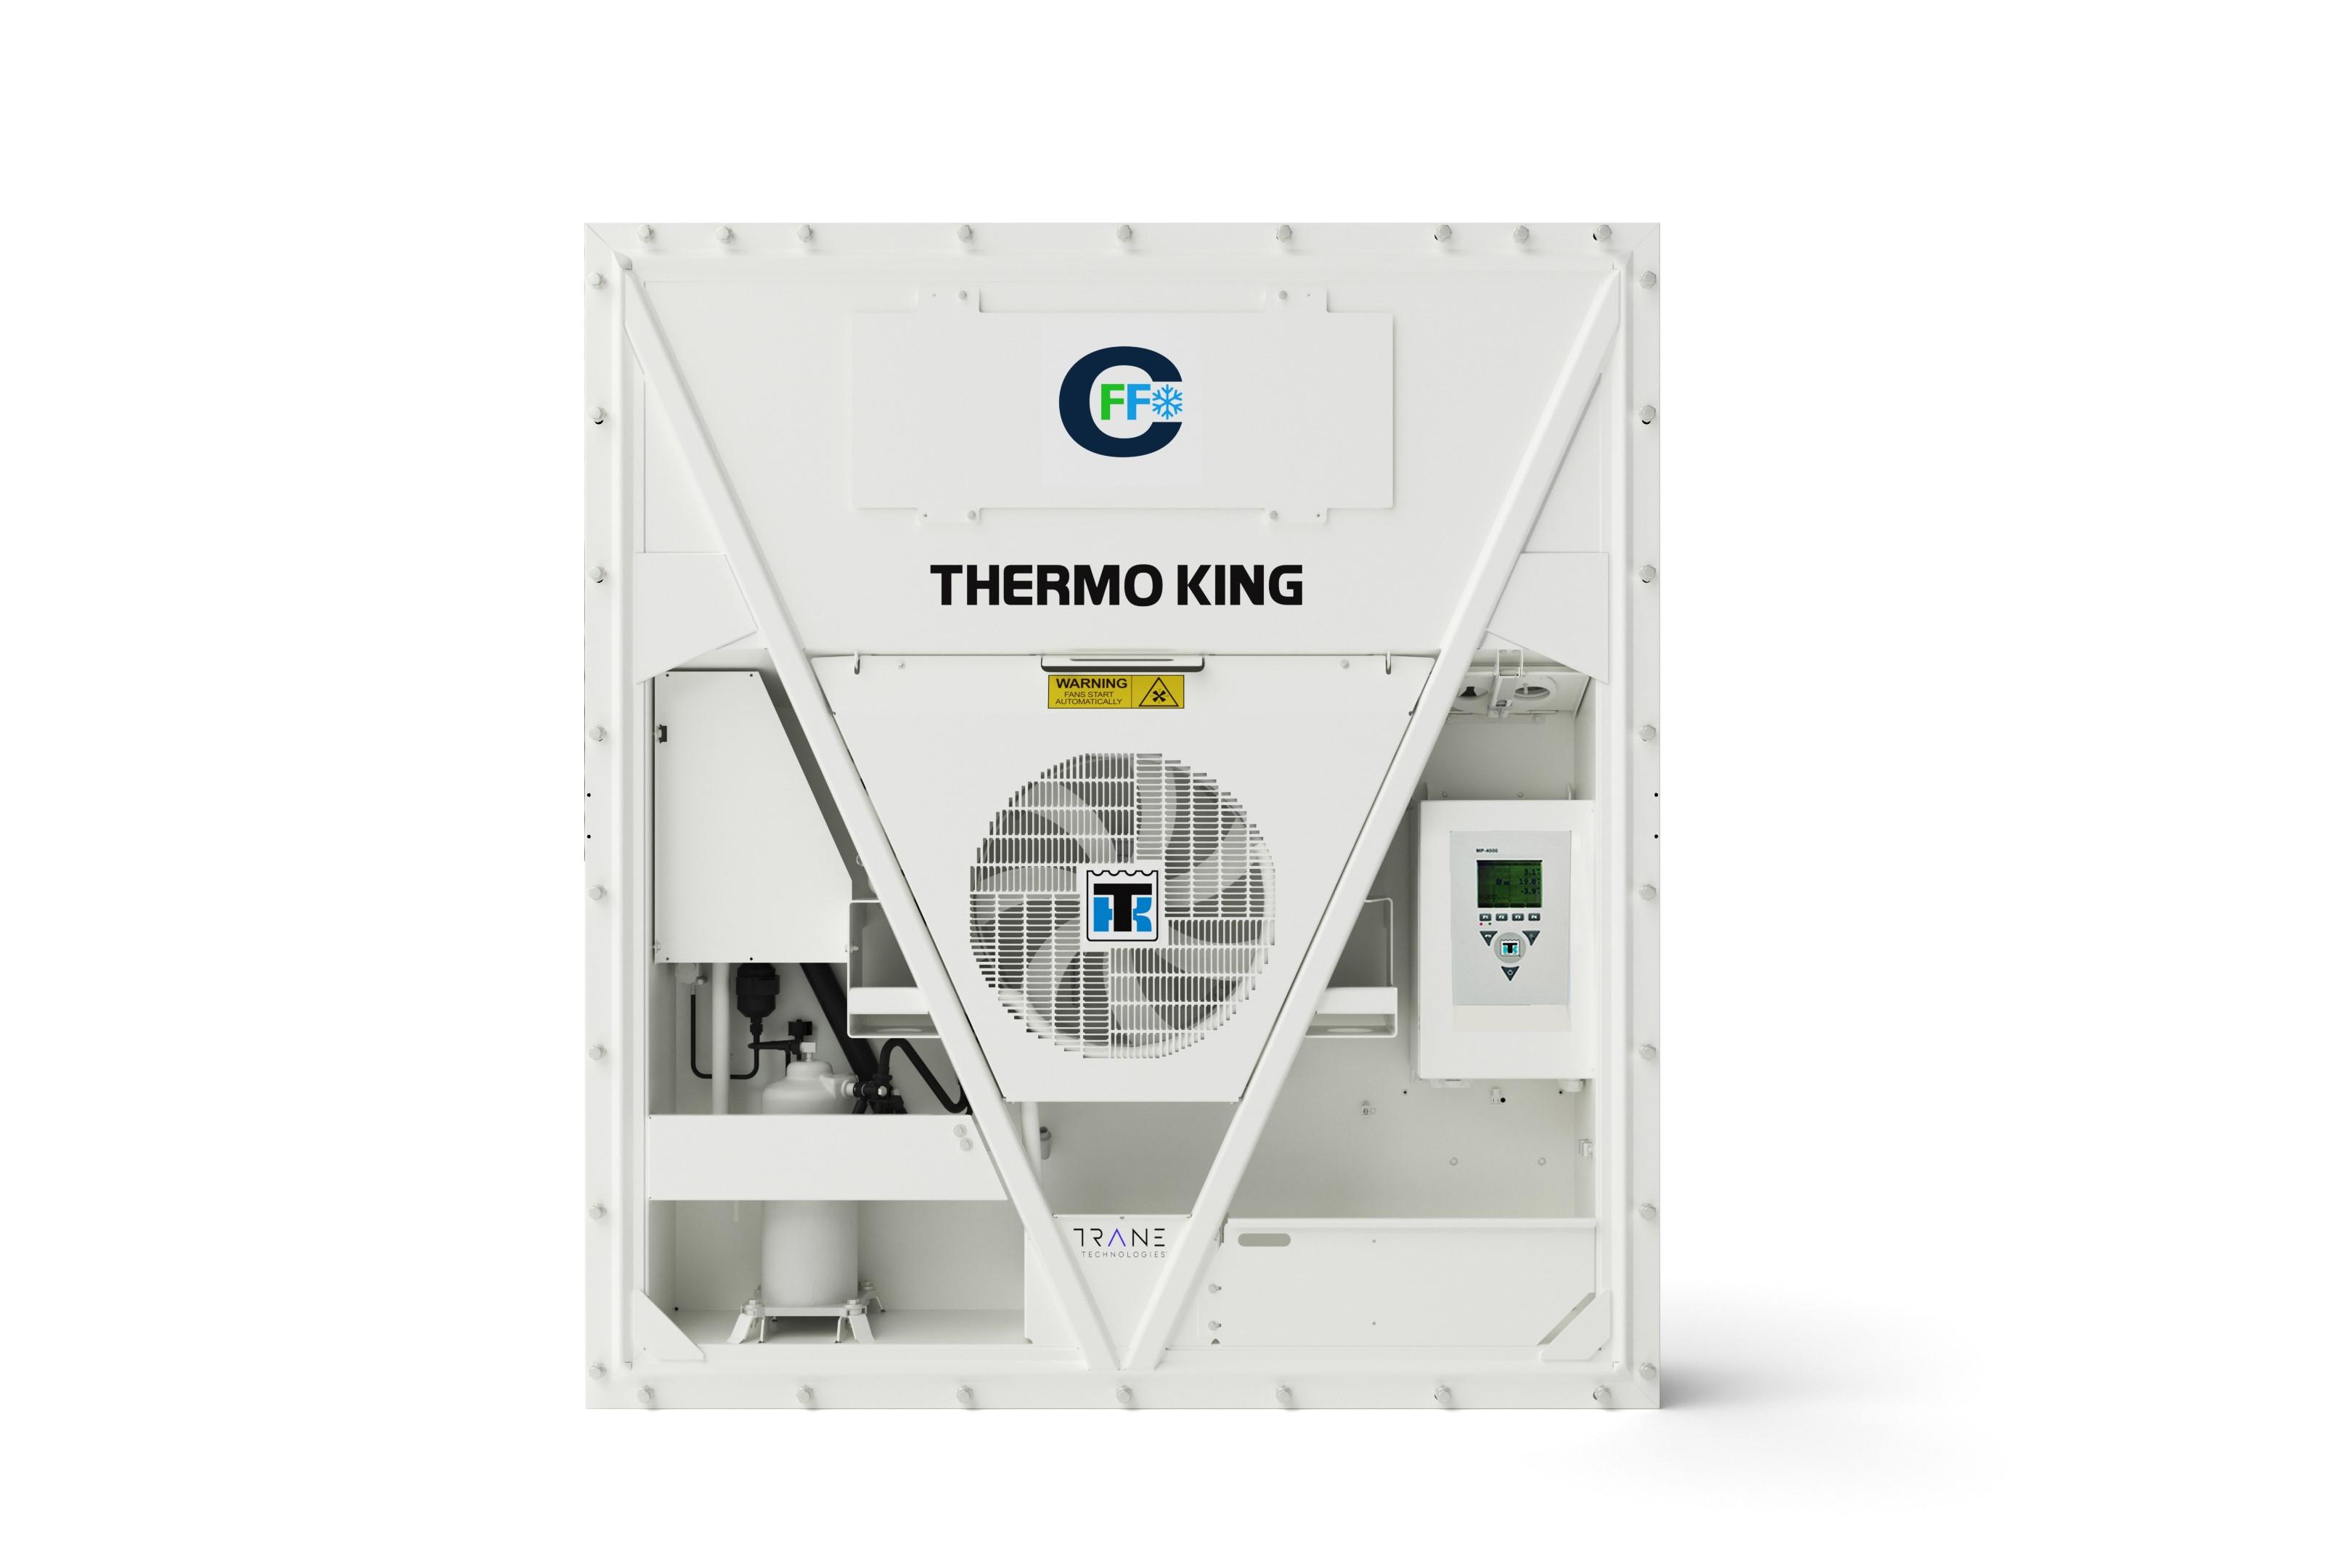 New Thermo King container fresh and frozen unit for refrigerated reefer container for sale or rent in Antwerp at ContainerID